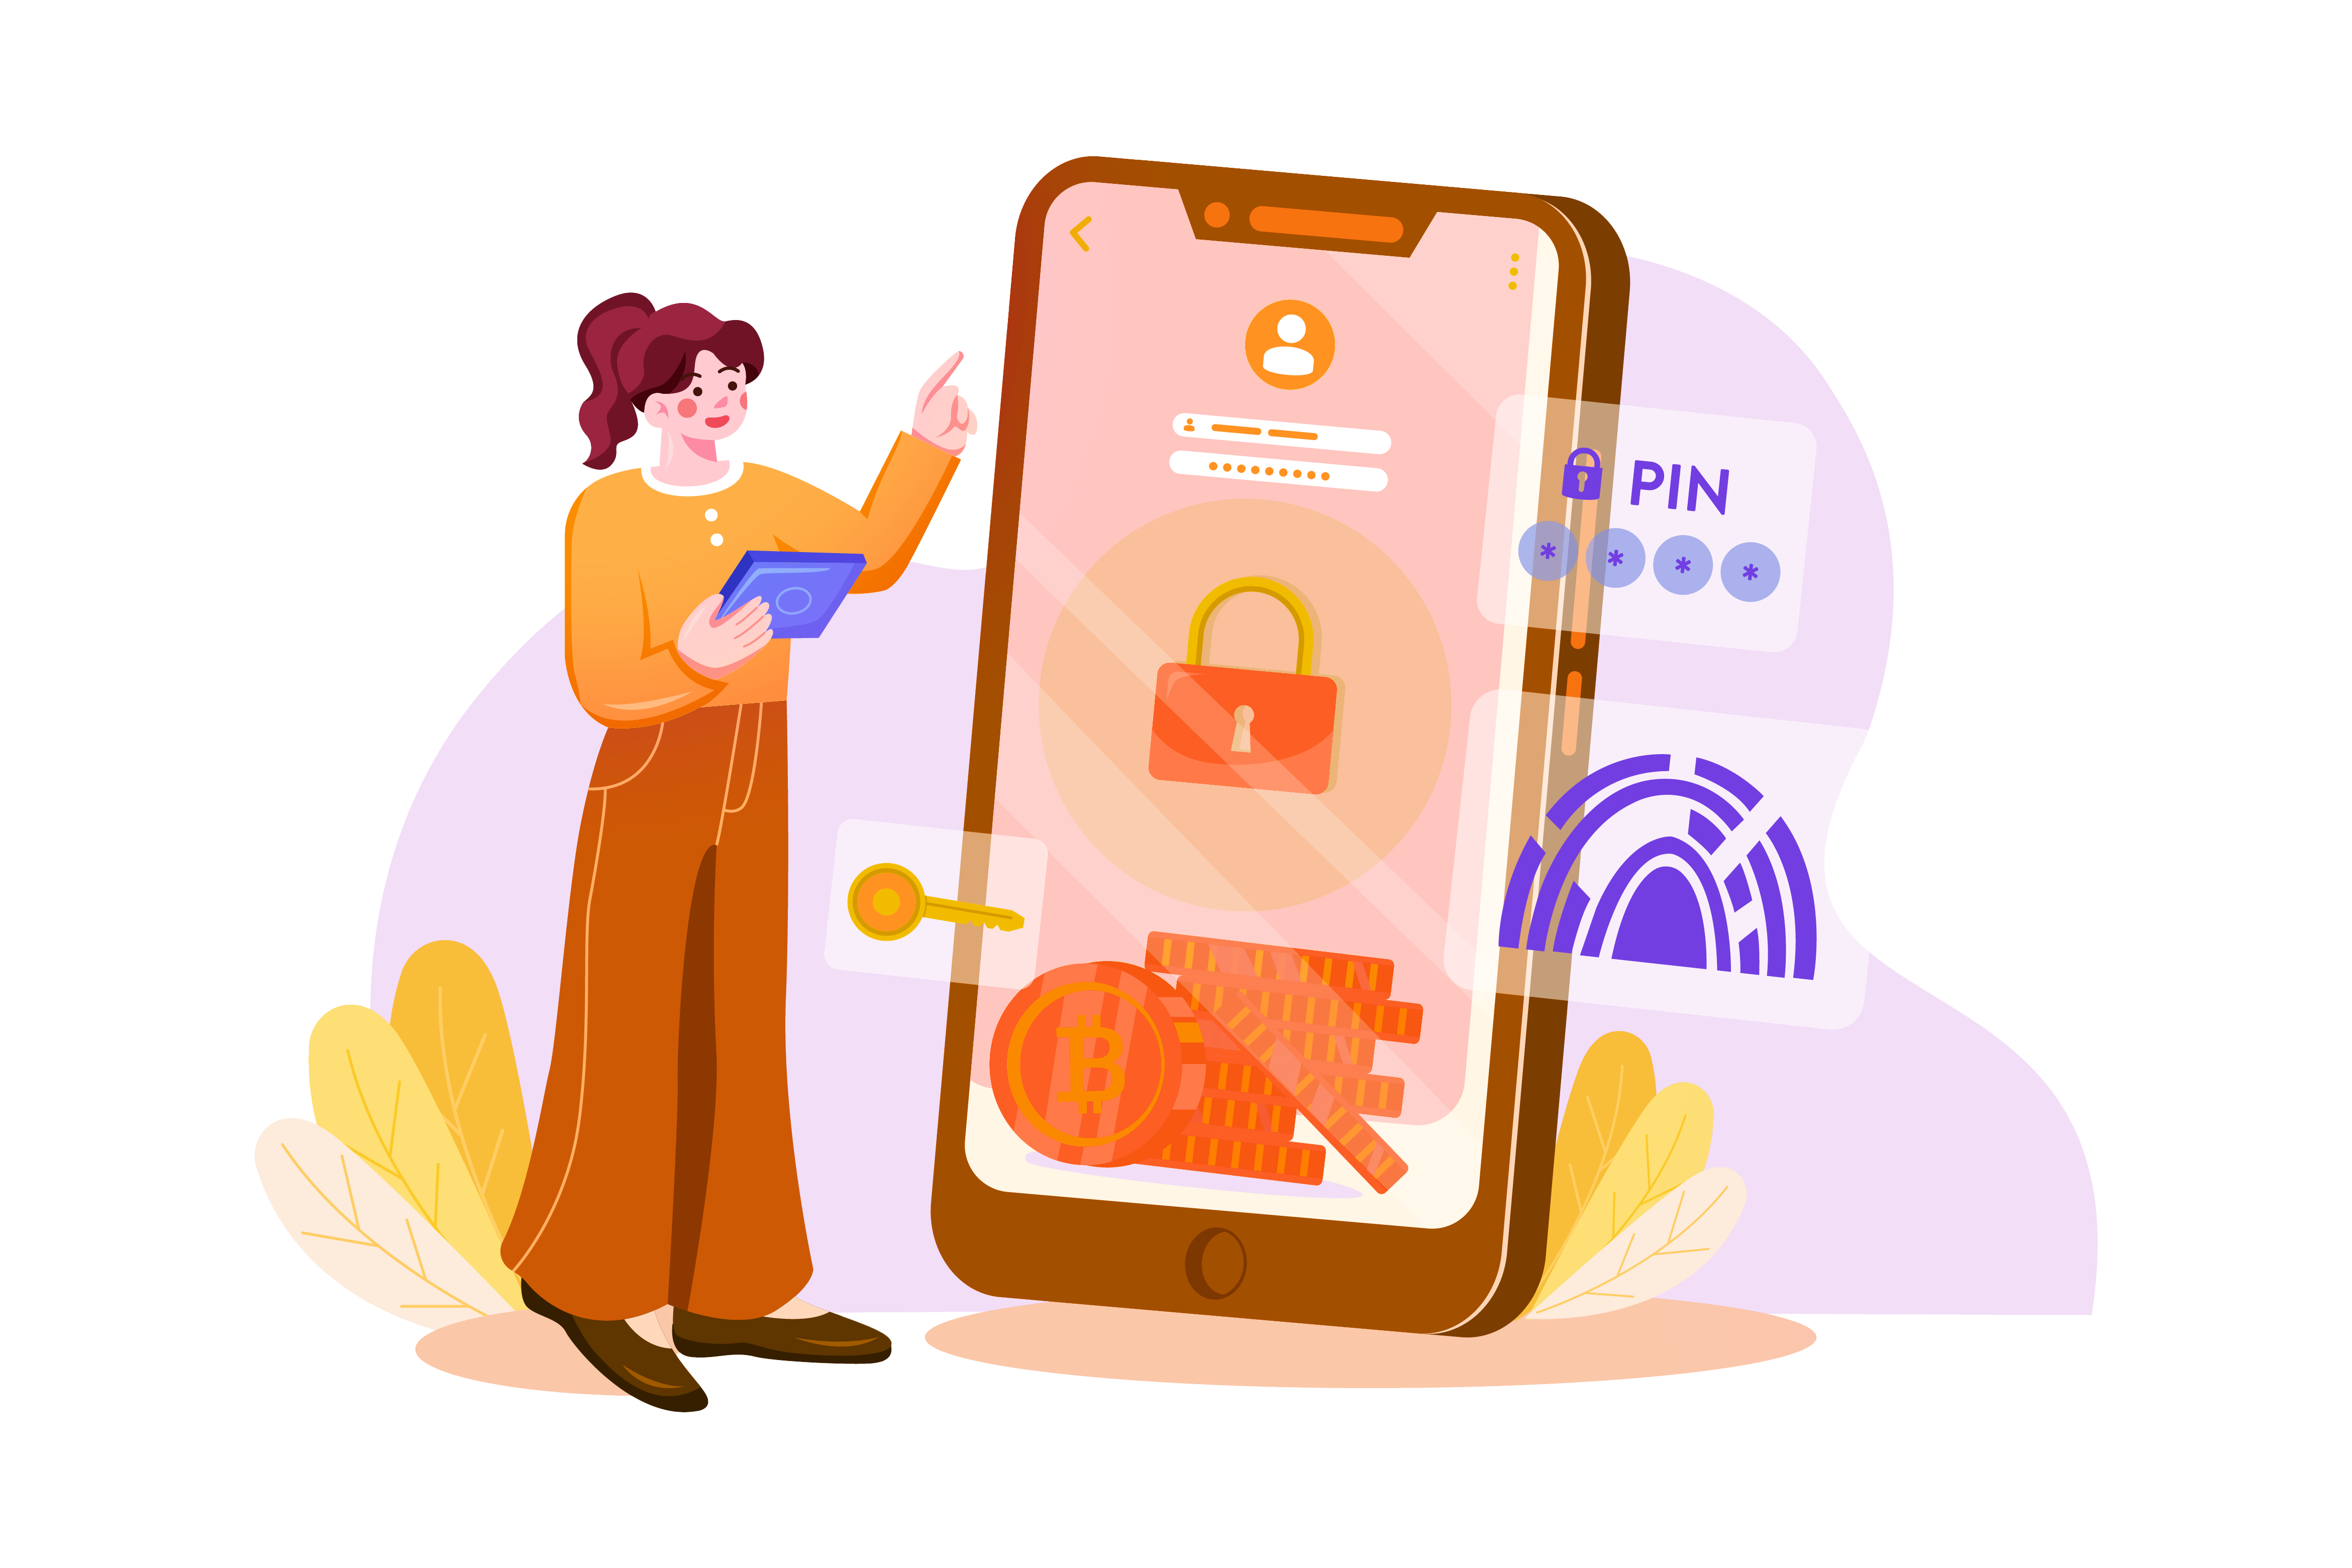 Cartoon illustration of a woman buying bitcoin on a phone